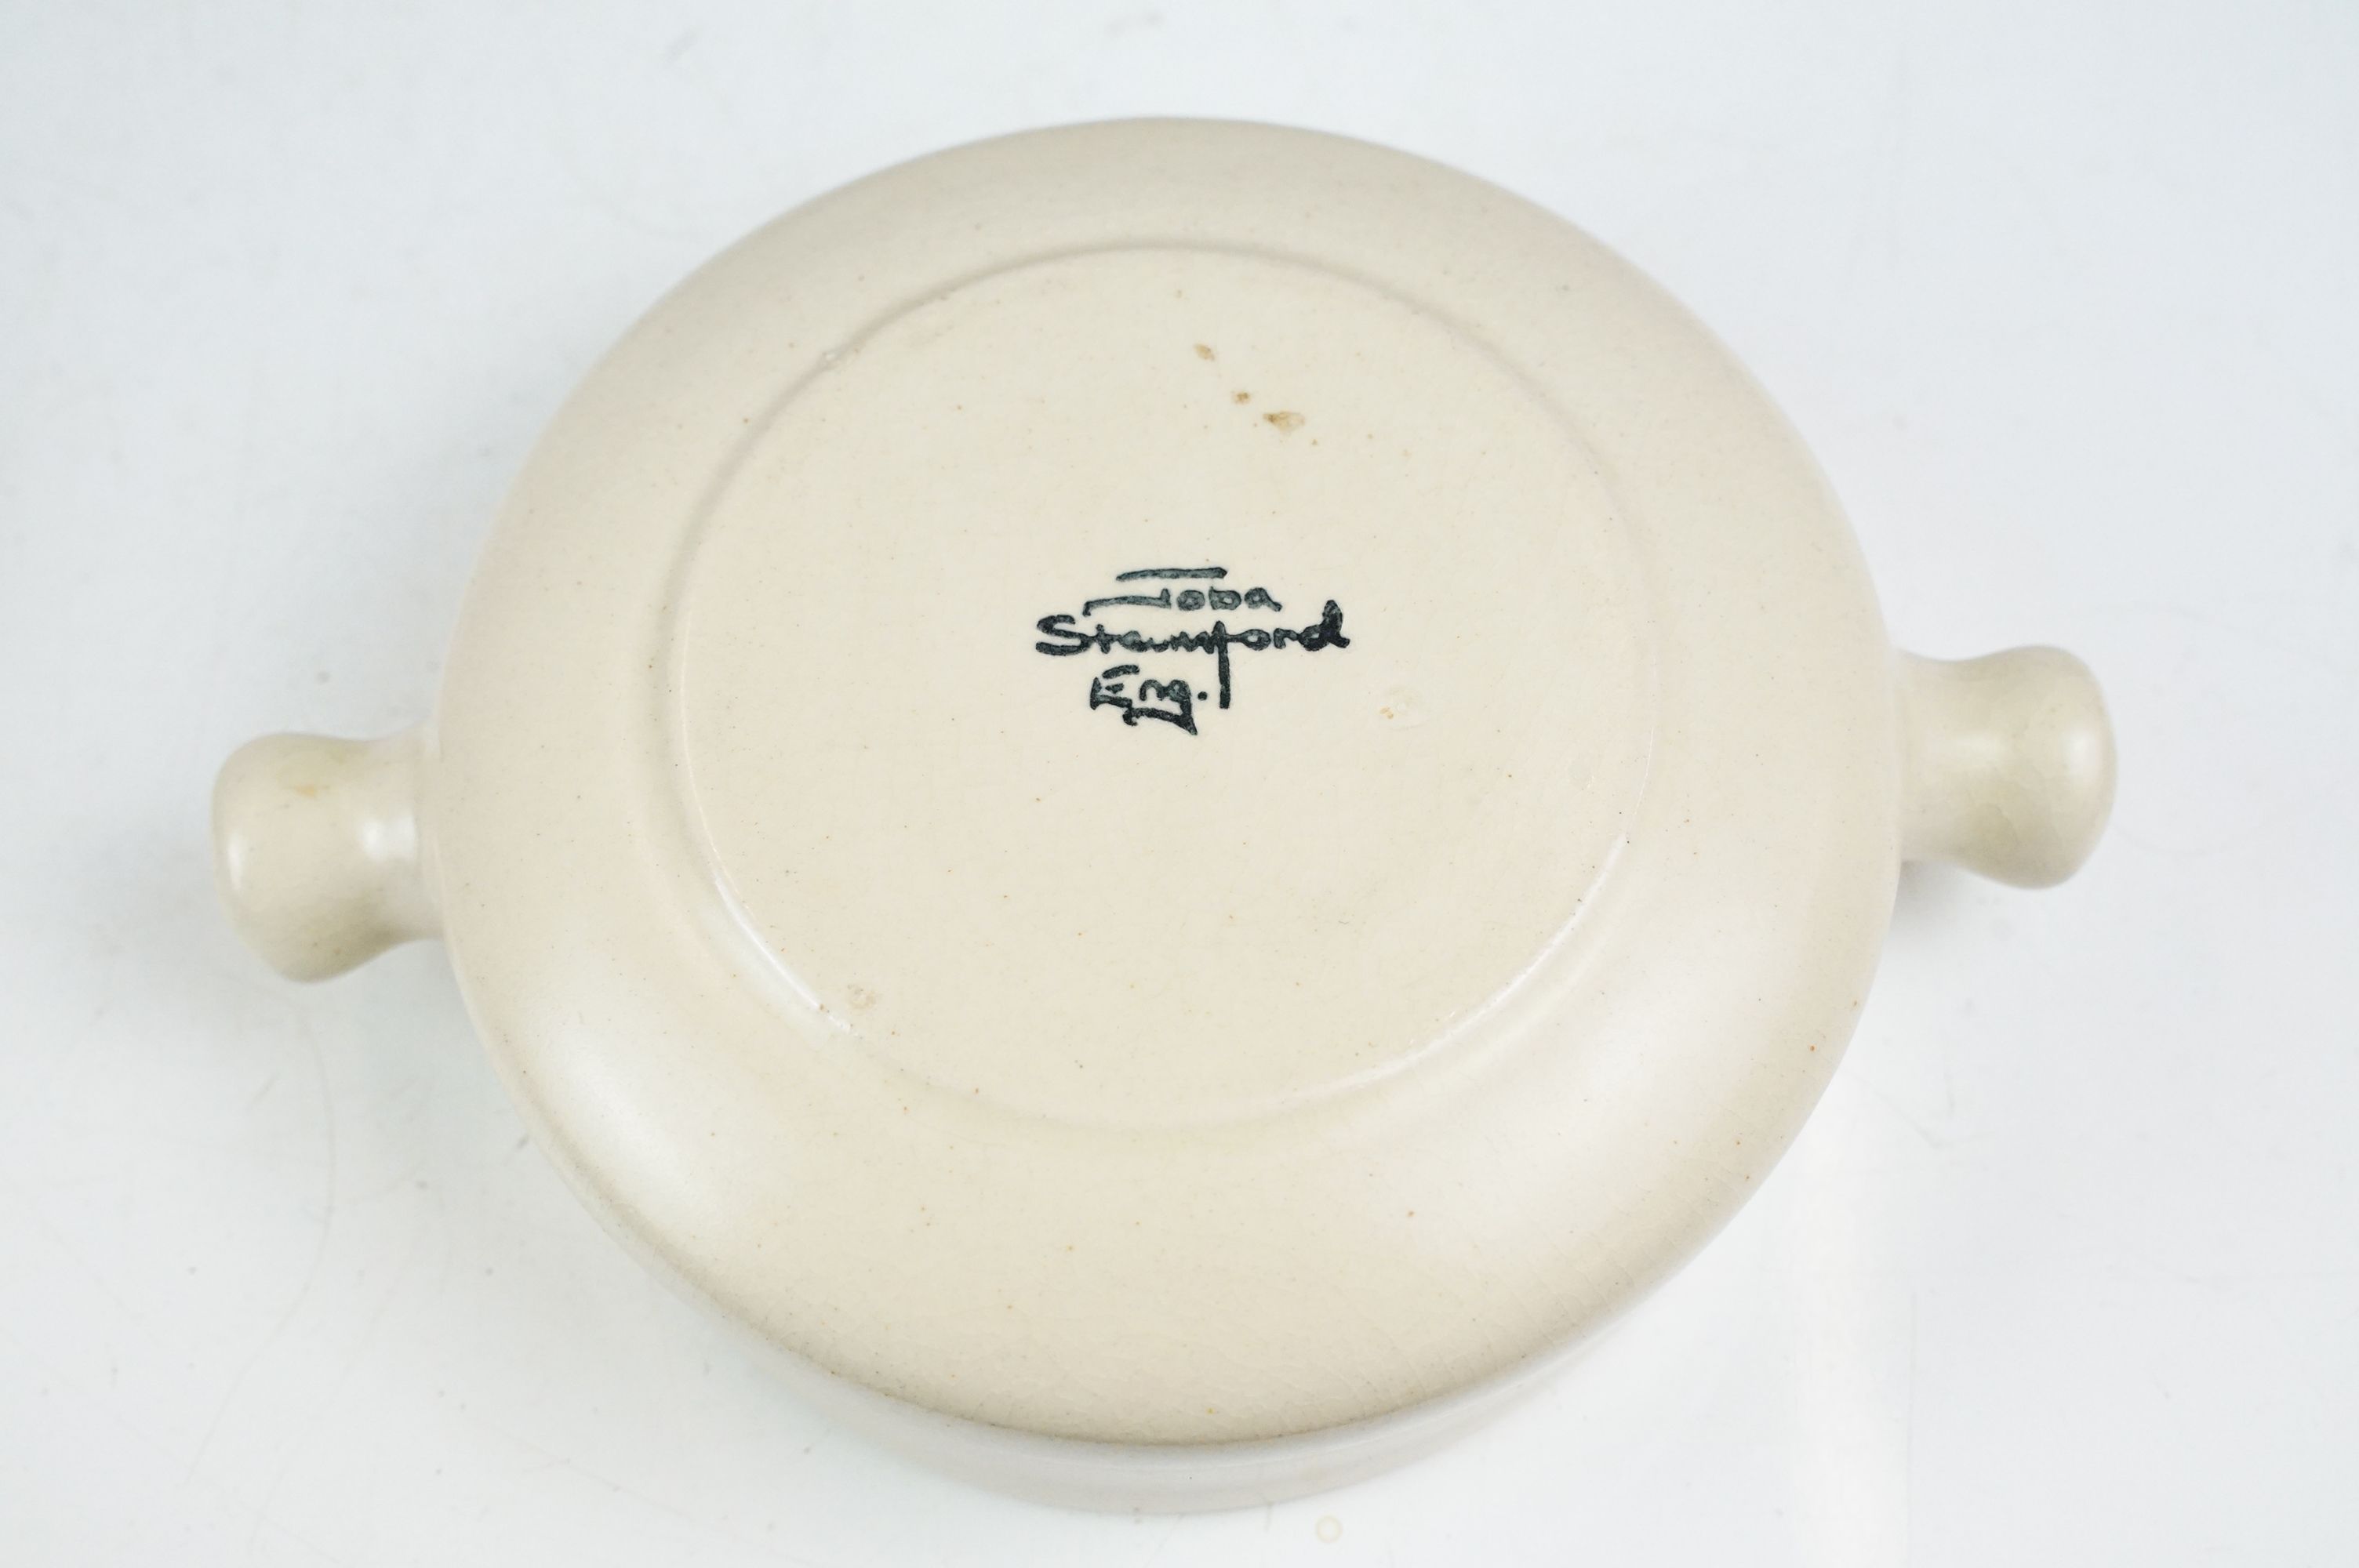 Set of six Joba Stamford pottery twin-handled soup bowls & covers, circa 1970's - Image 5 of 8